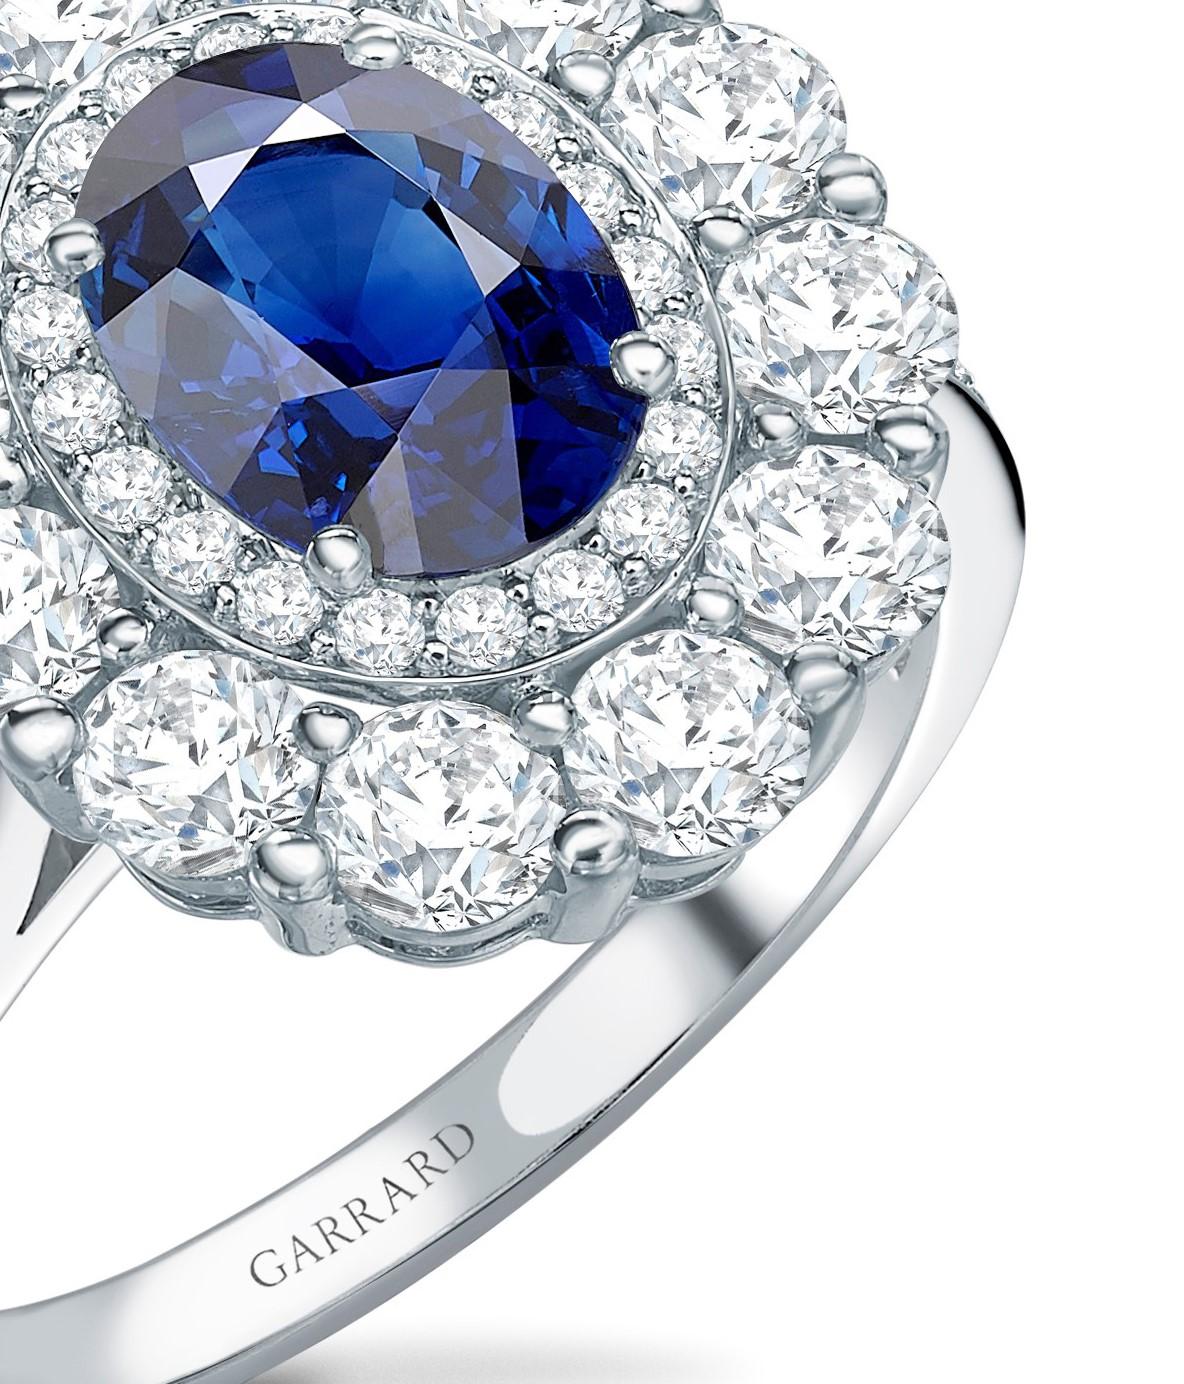 A House of Garrard platinum double cluster surround ring from the 1735 collection set with a central GIA certified oval blue sapphire weighing 1.37 carats and 58 round white diamonds weighing 1.56 carats
Size: 51 / L / 5 (3/4) (Ring can be sized up